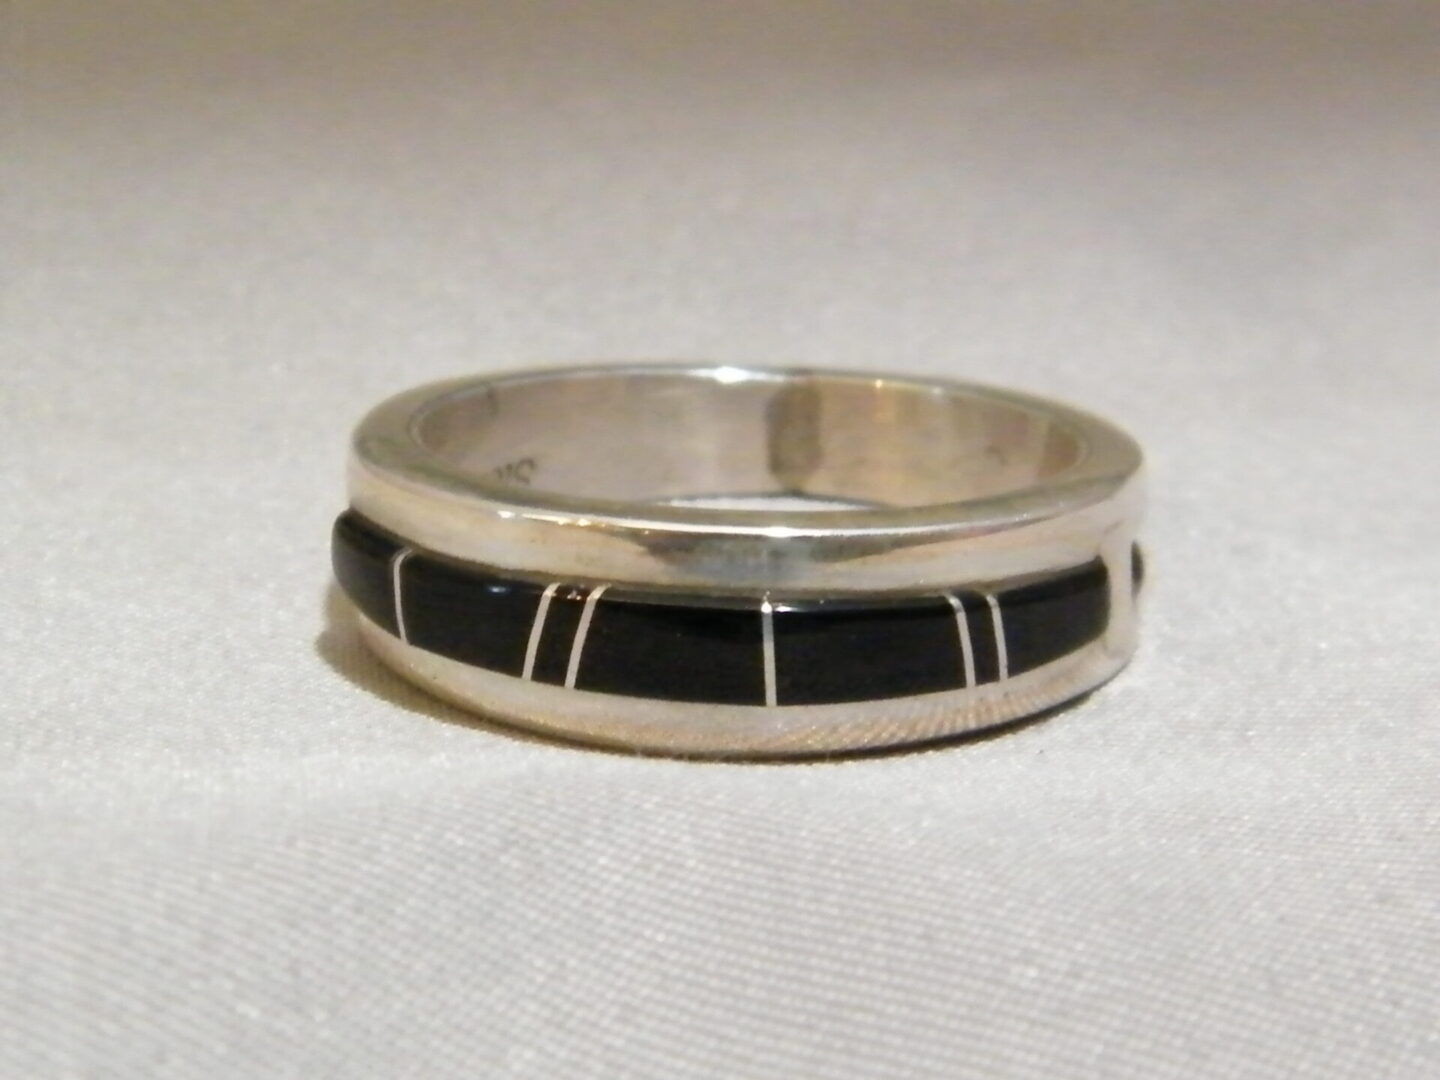 A Silver Ring With Black Stone and WHite Lines